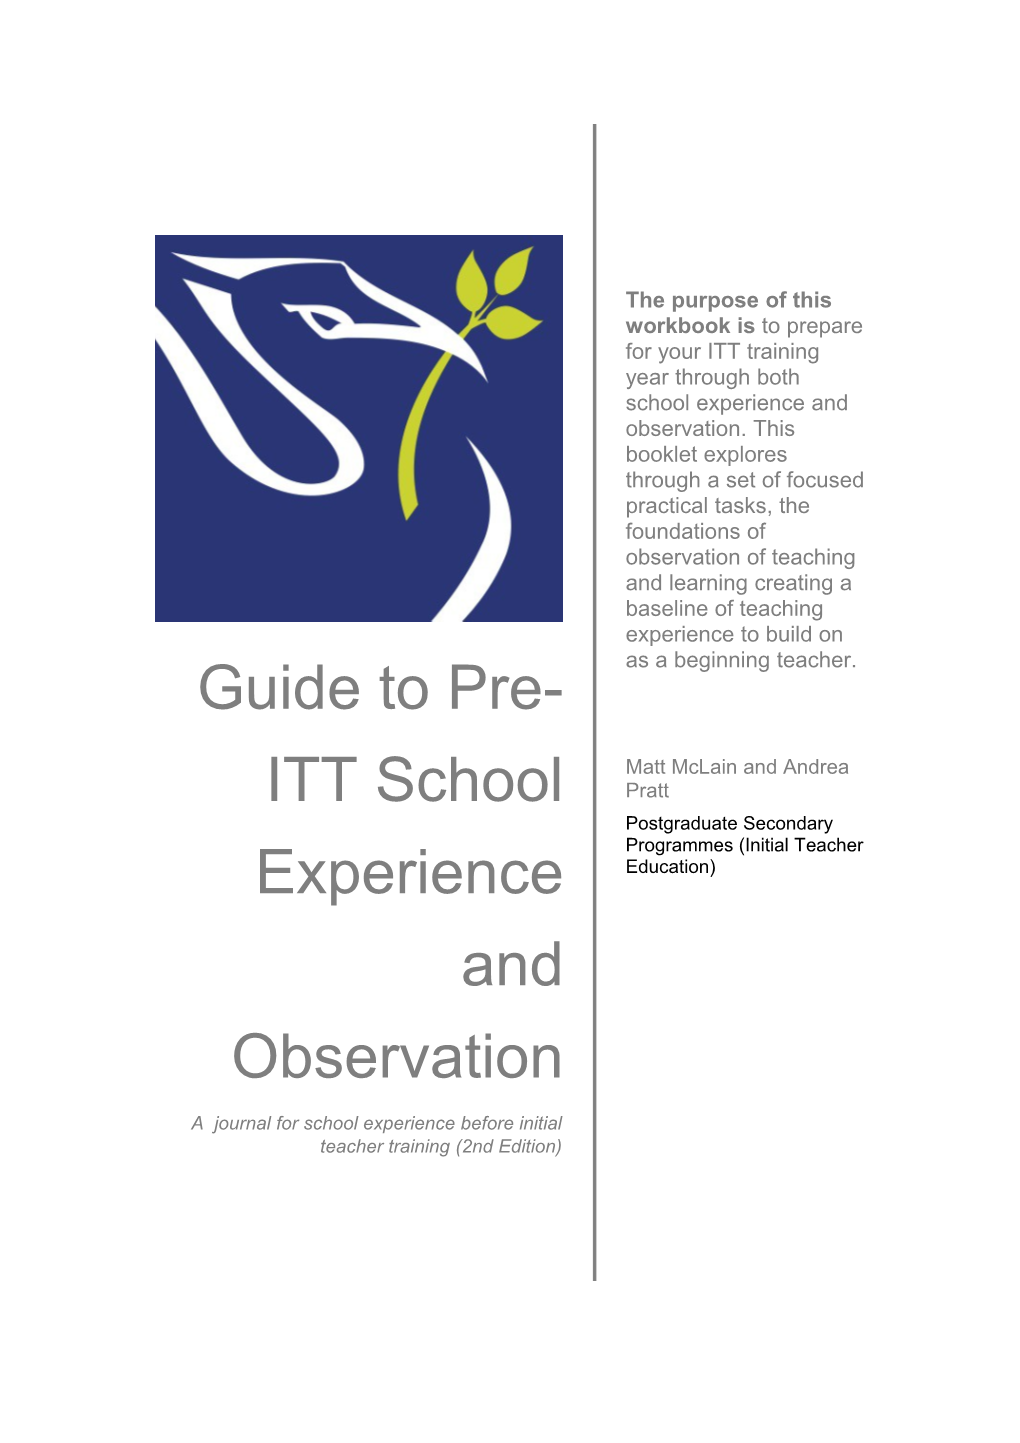 Guide to Pre-ITT School Experience and Observation